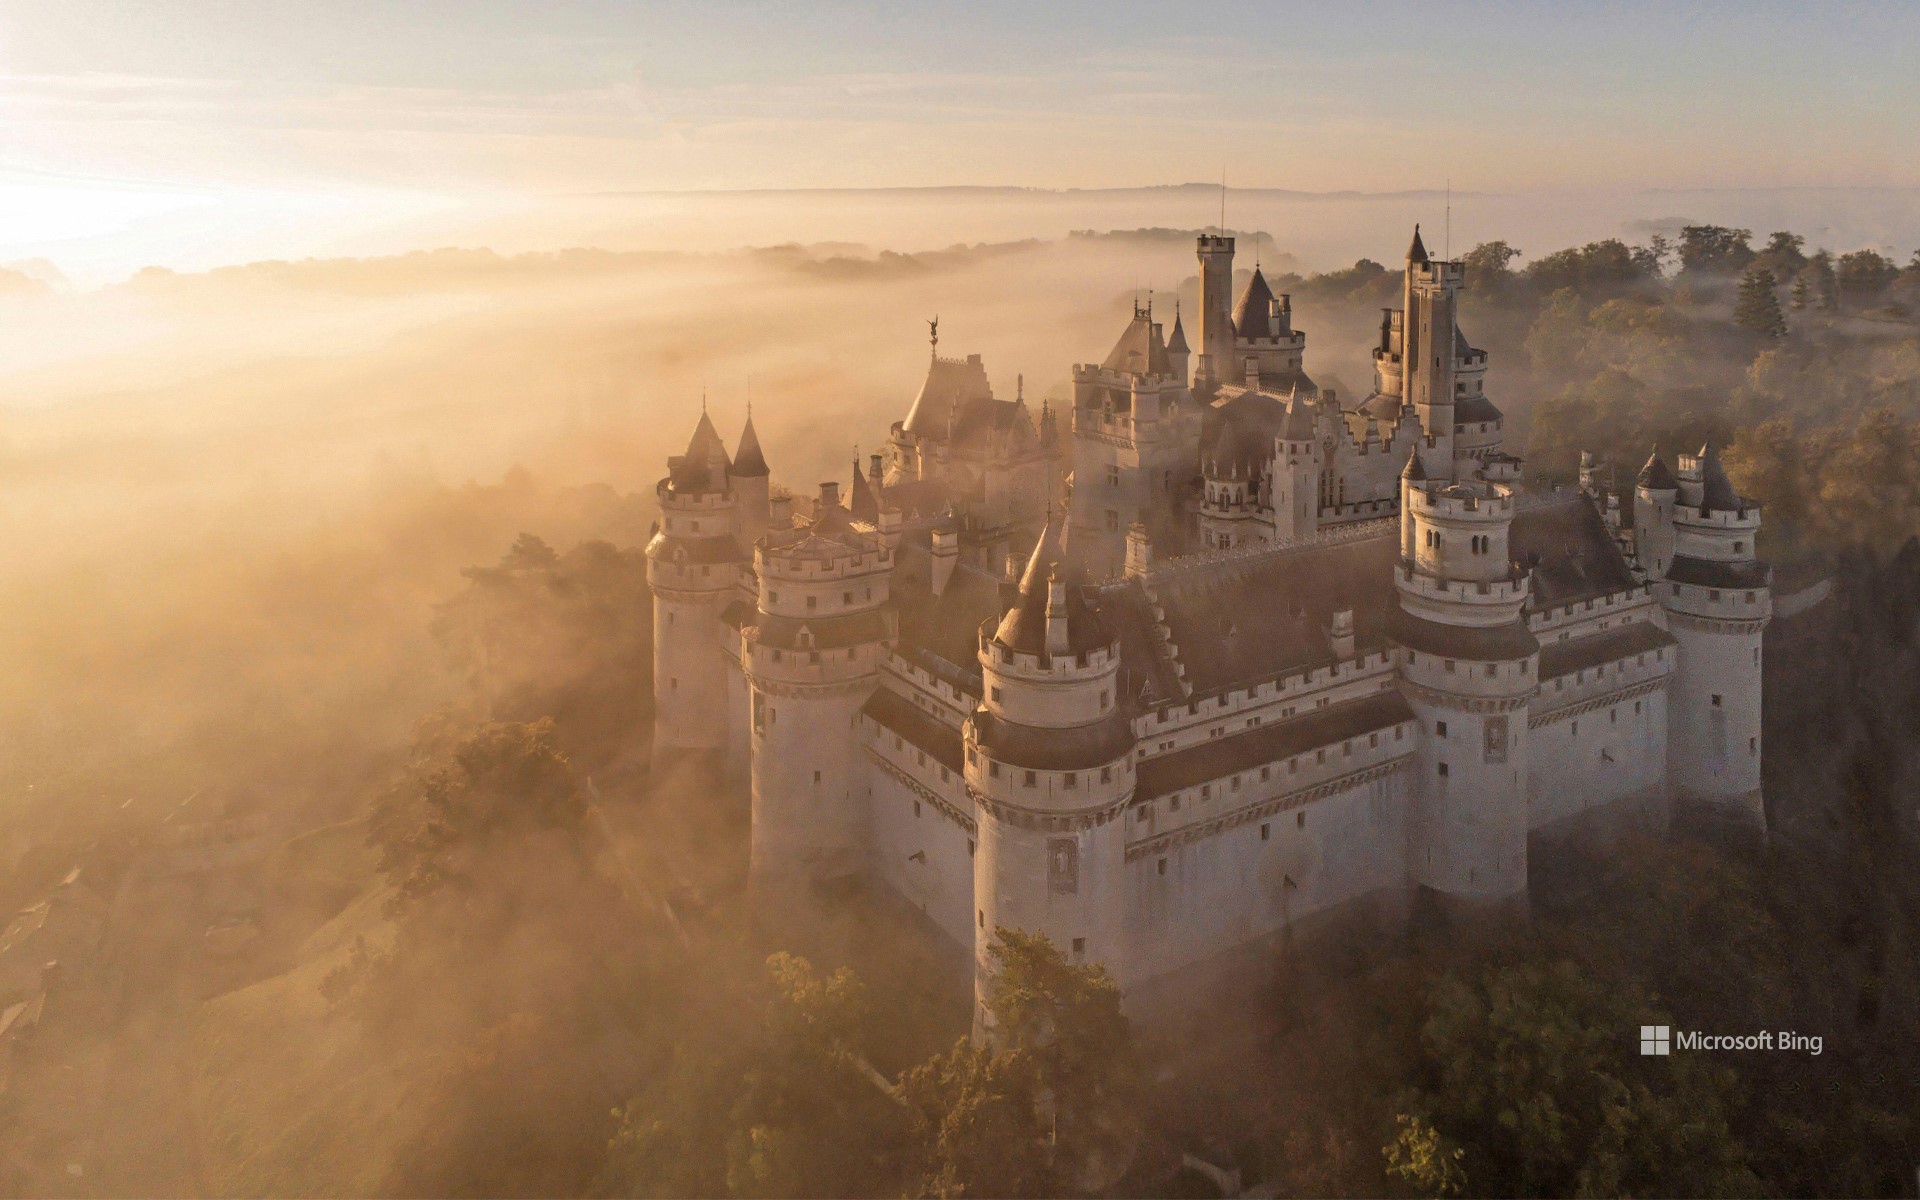 The Château de Pierrefonds in the Oise department of Picardy, France